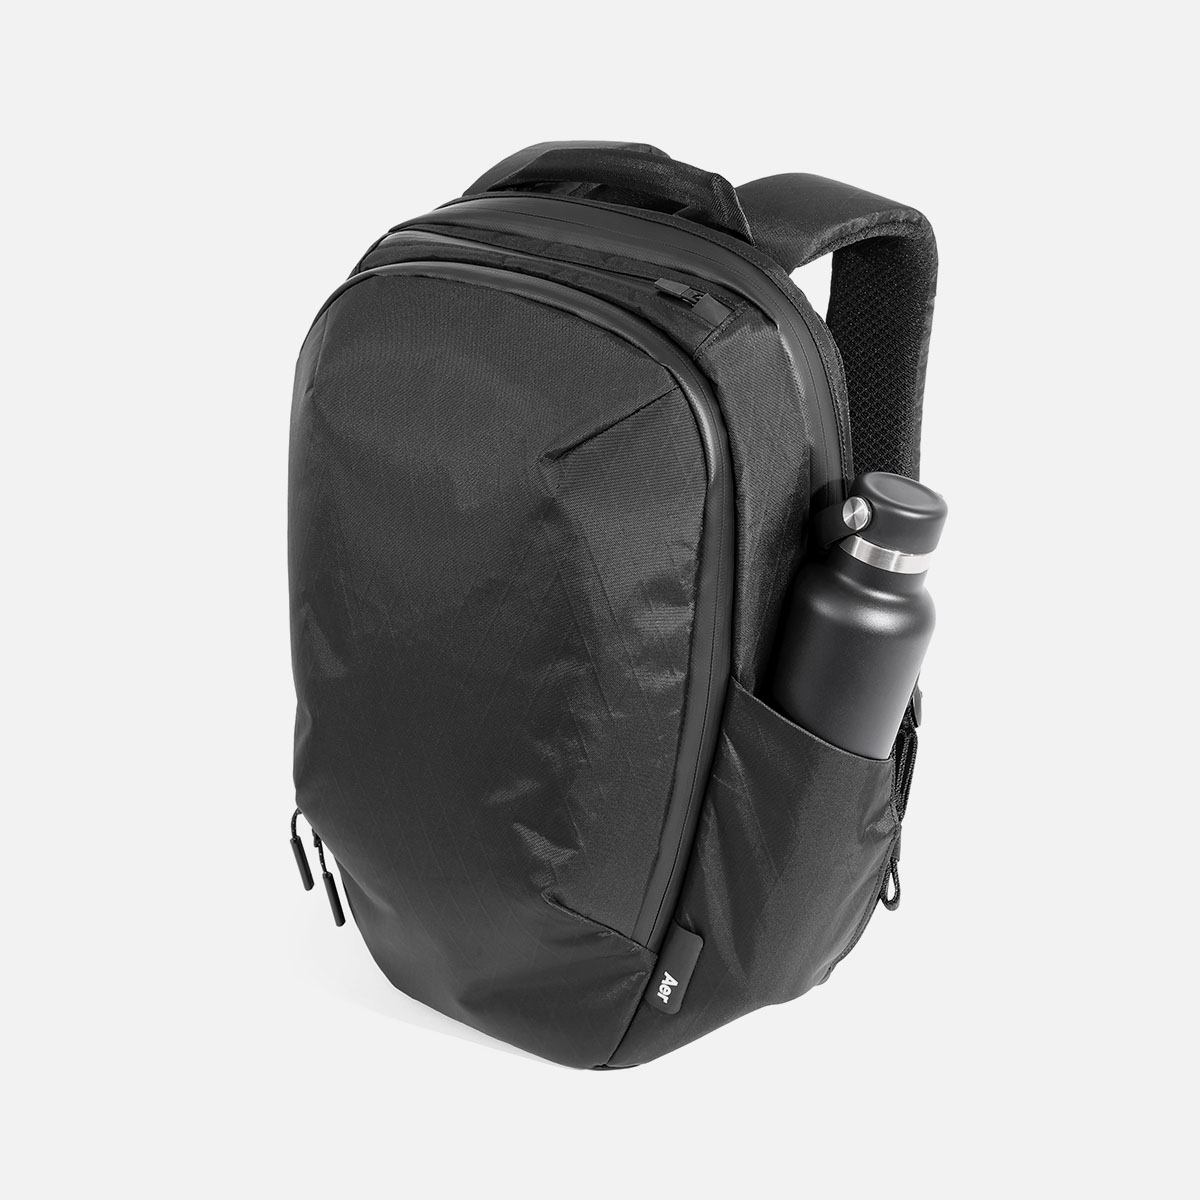 Day Pack 3 X-Pac